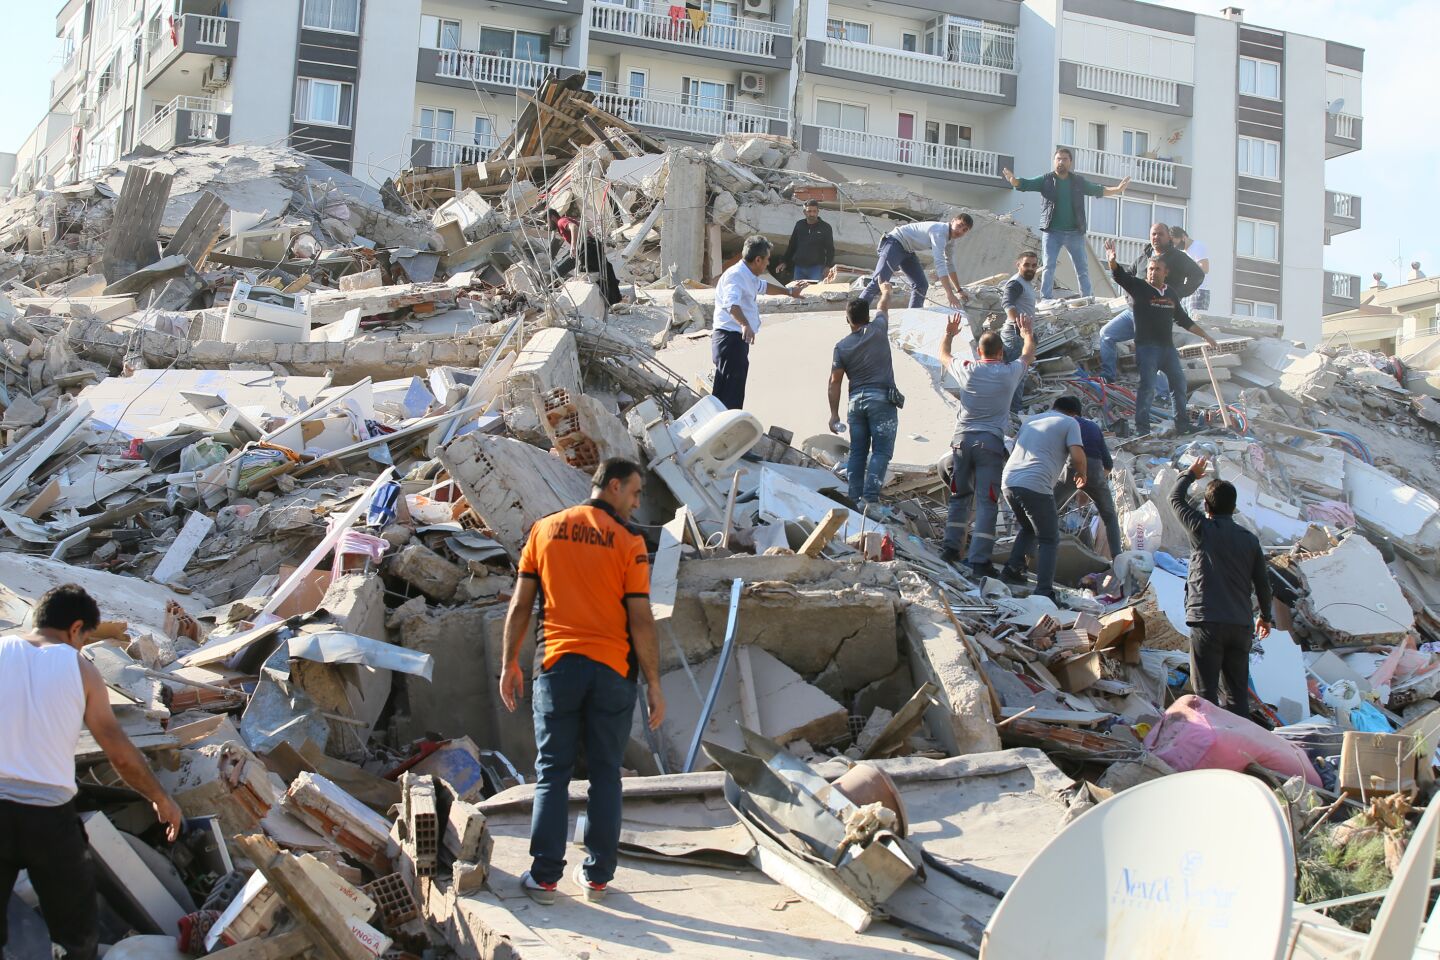 Search-and-rescue teams sift through debris of a building in Izmir, Turkey after a strong earthquake